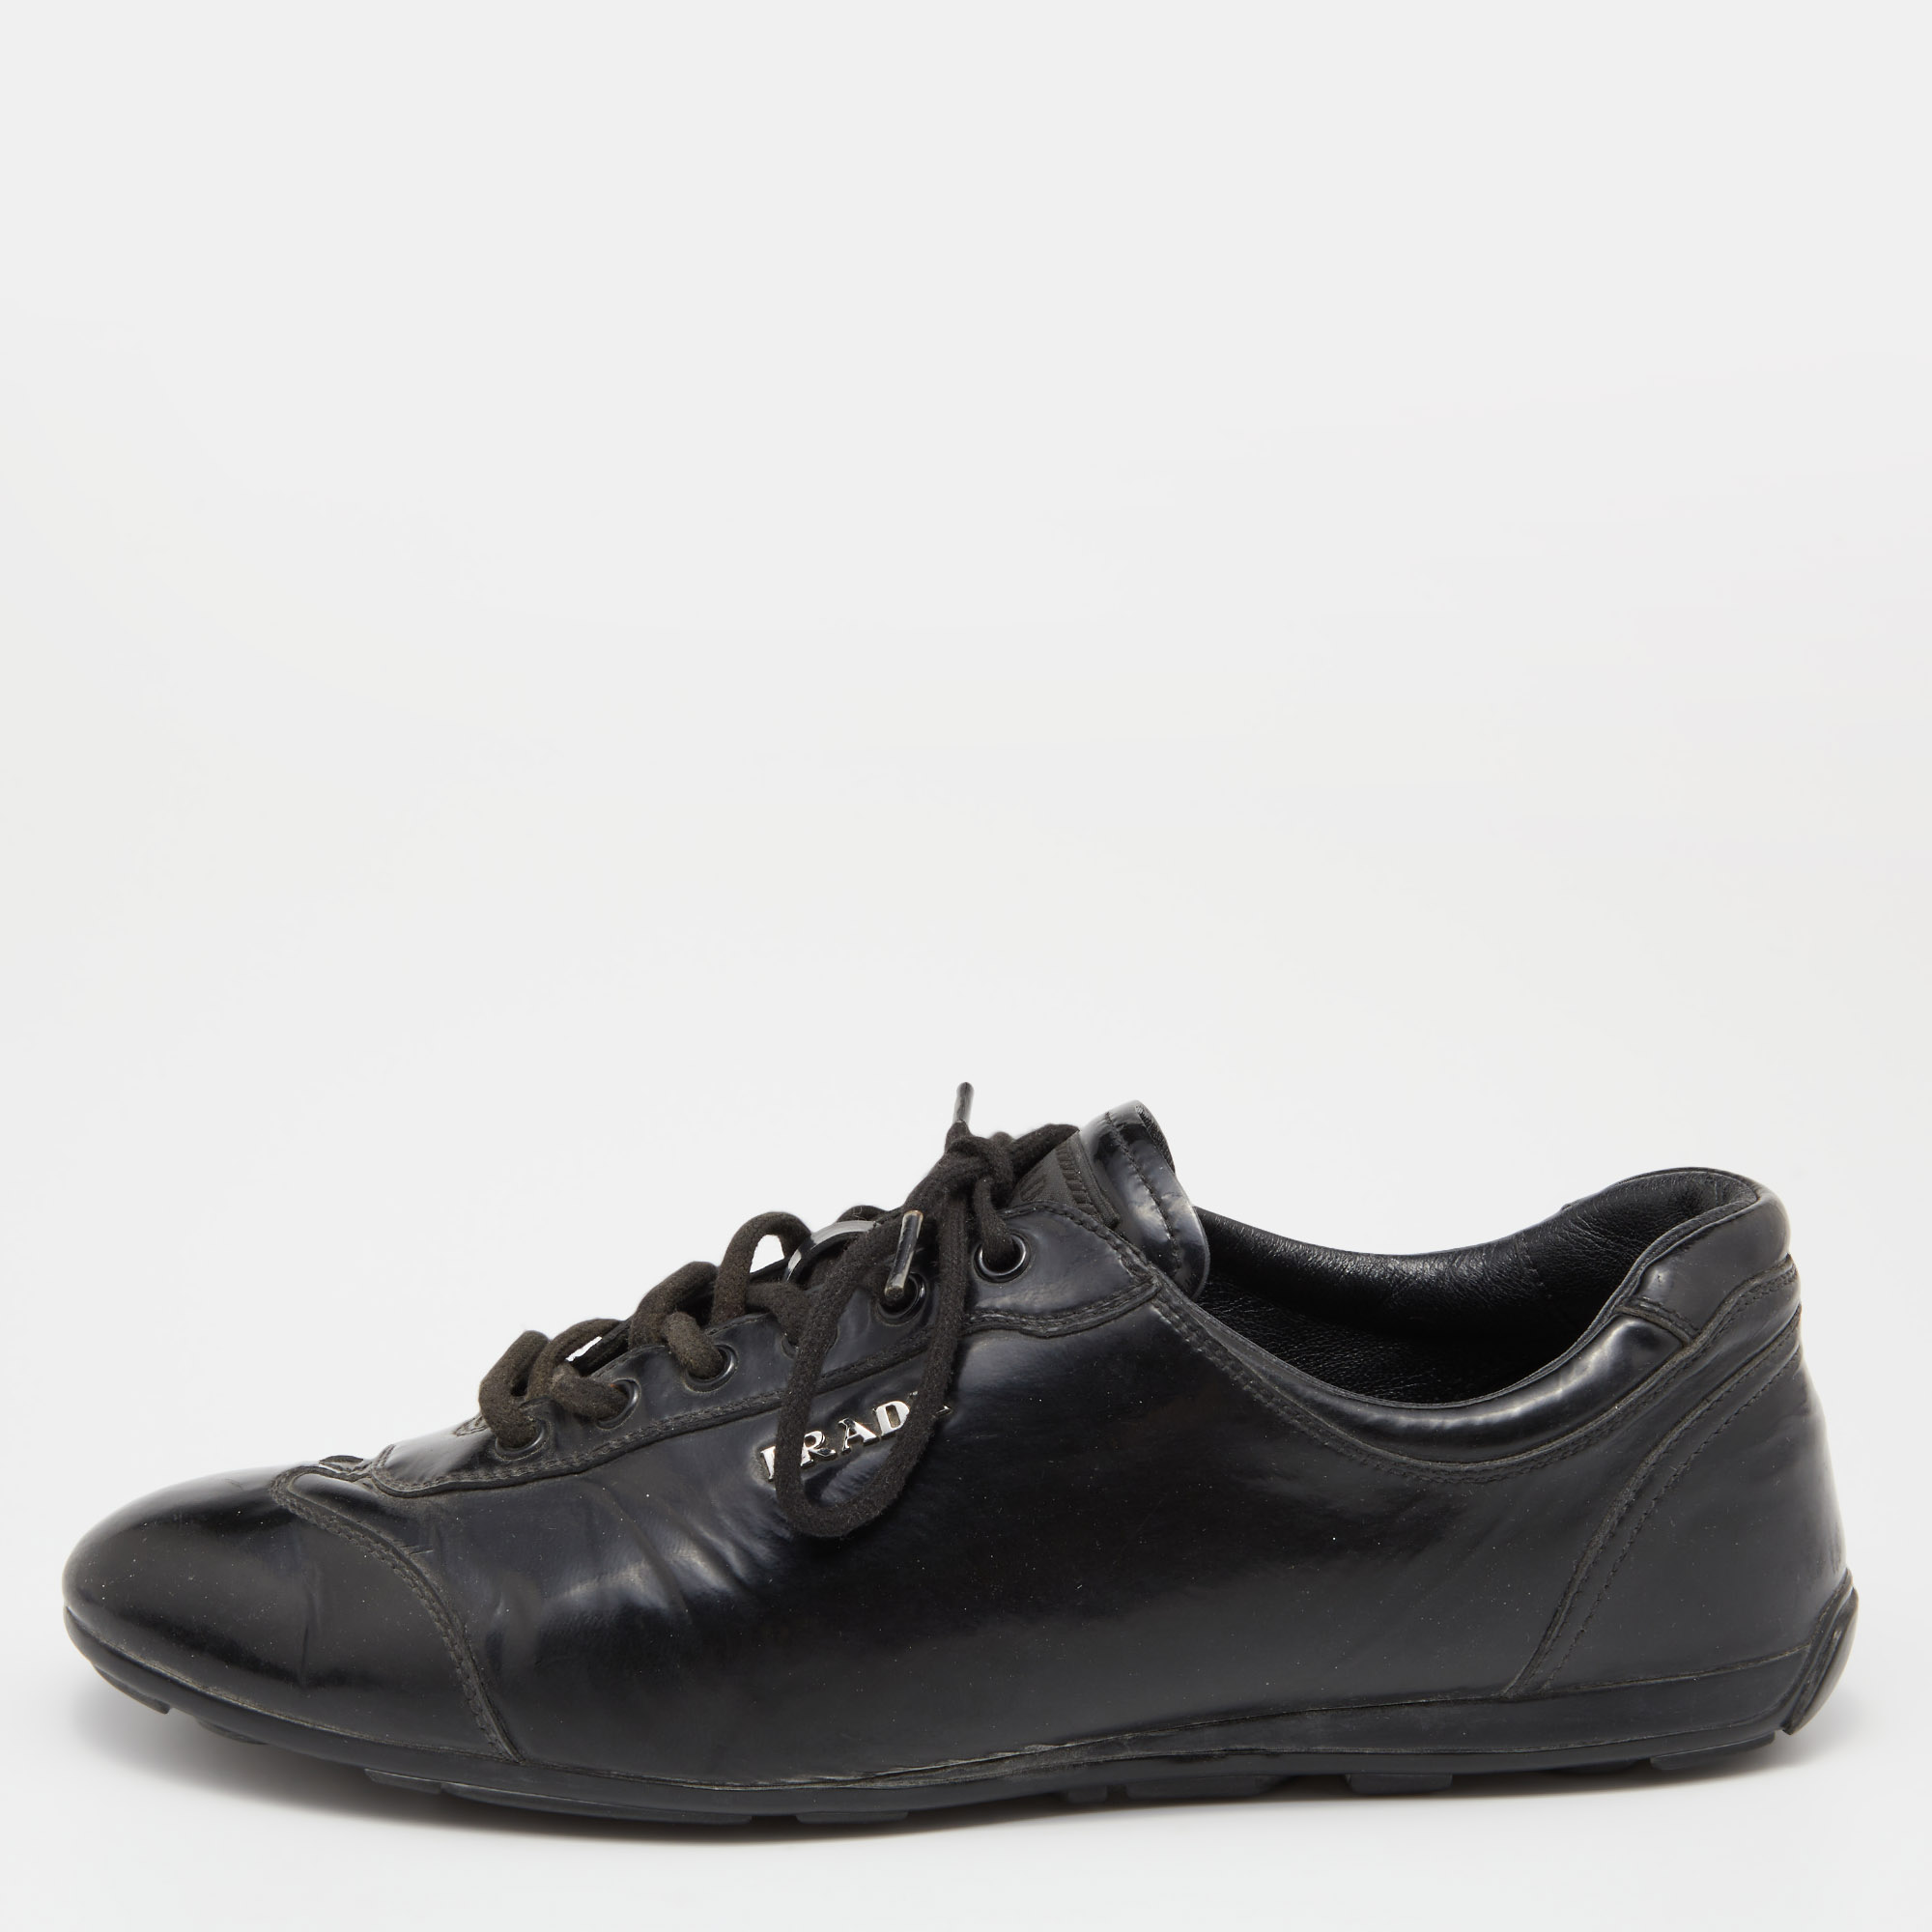 Prada Sports Black Patent Leather Low Top Sneakers Size 40